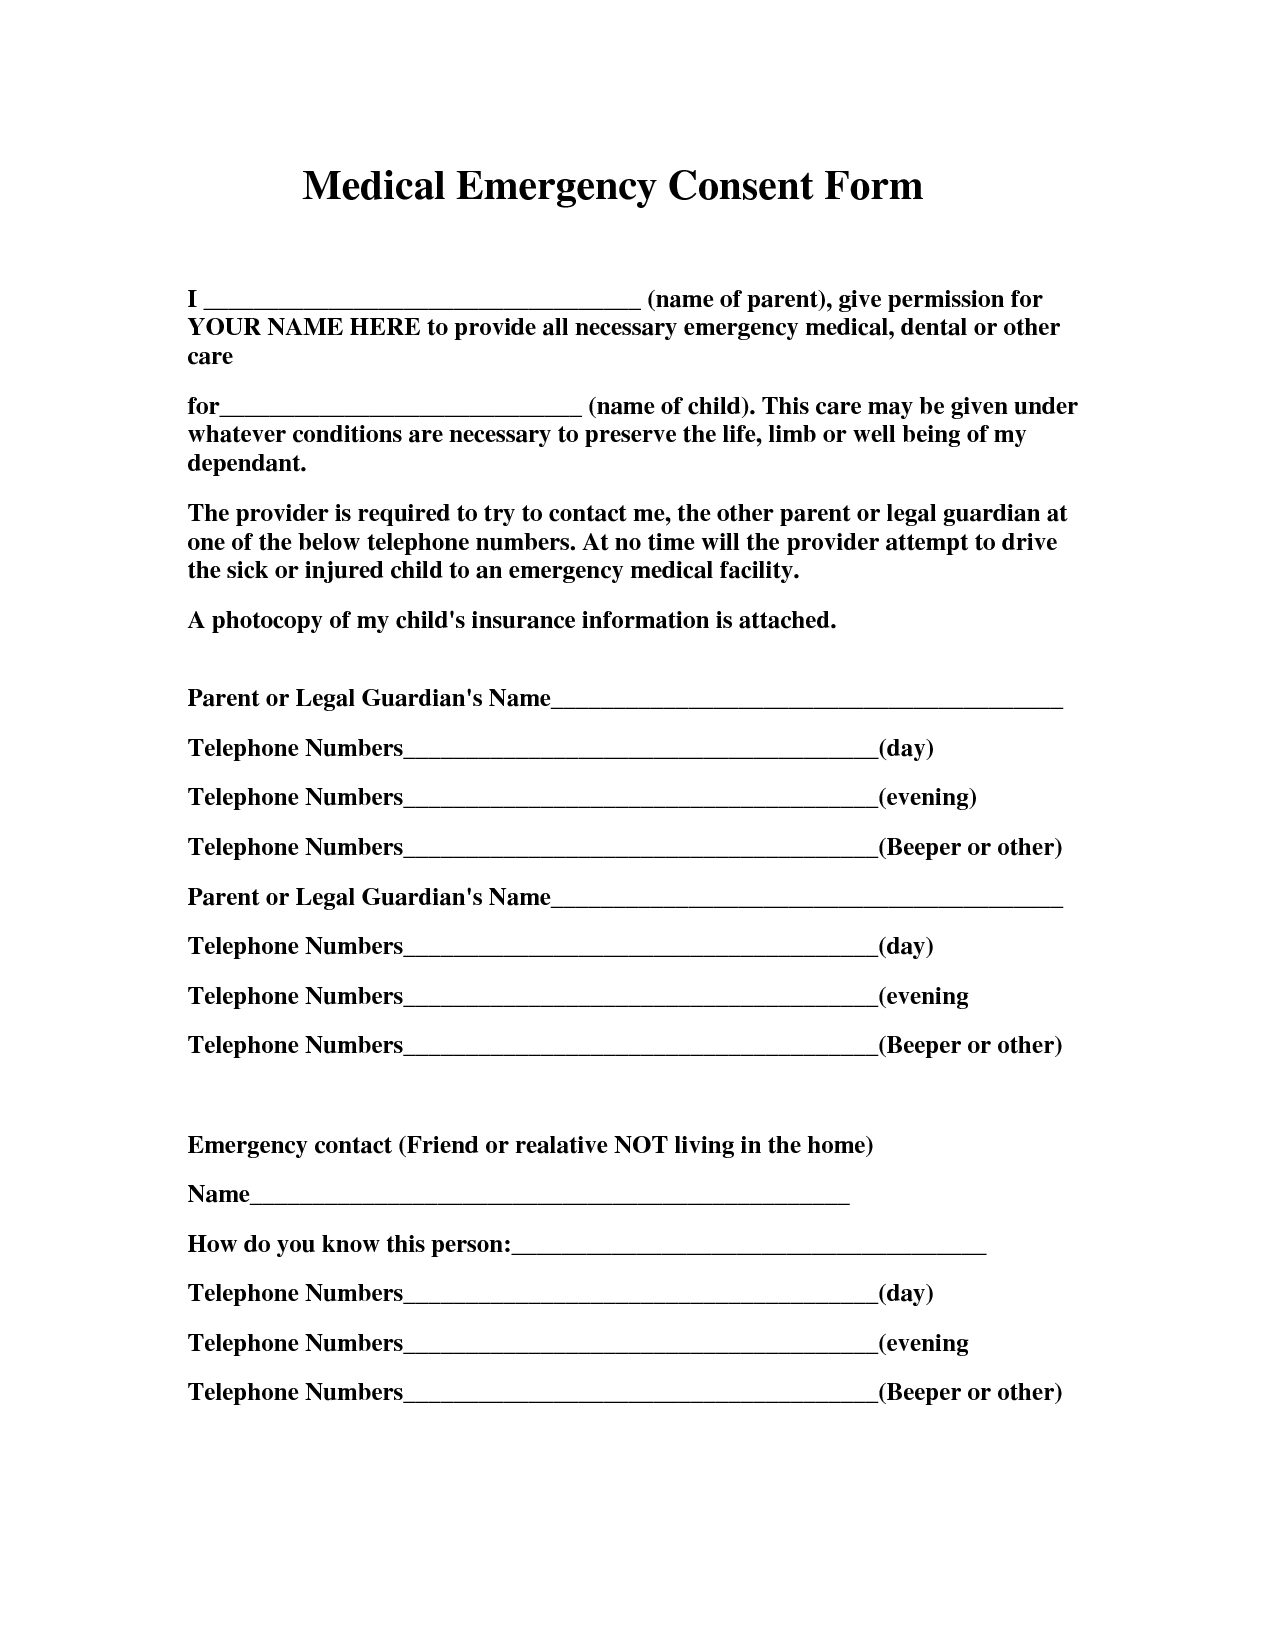 printable-medical-consent-form-for-urgent-care-printable-forms-free